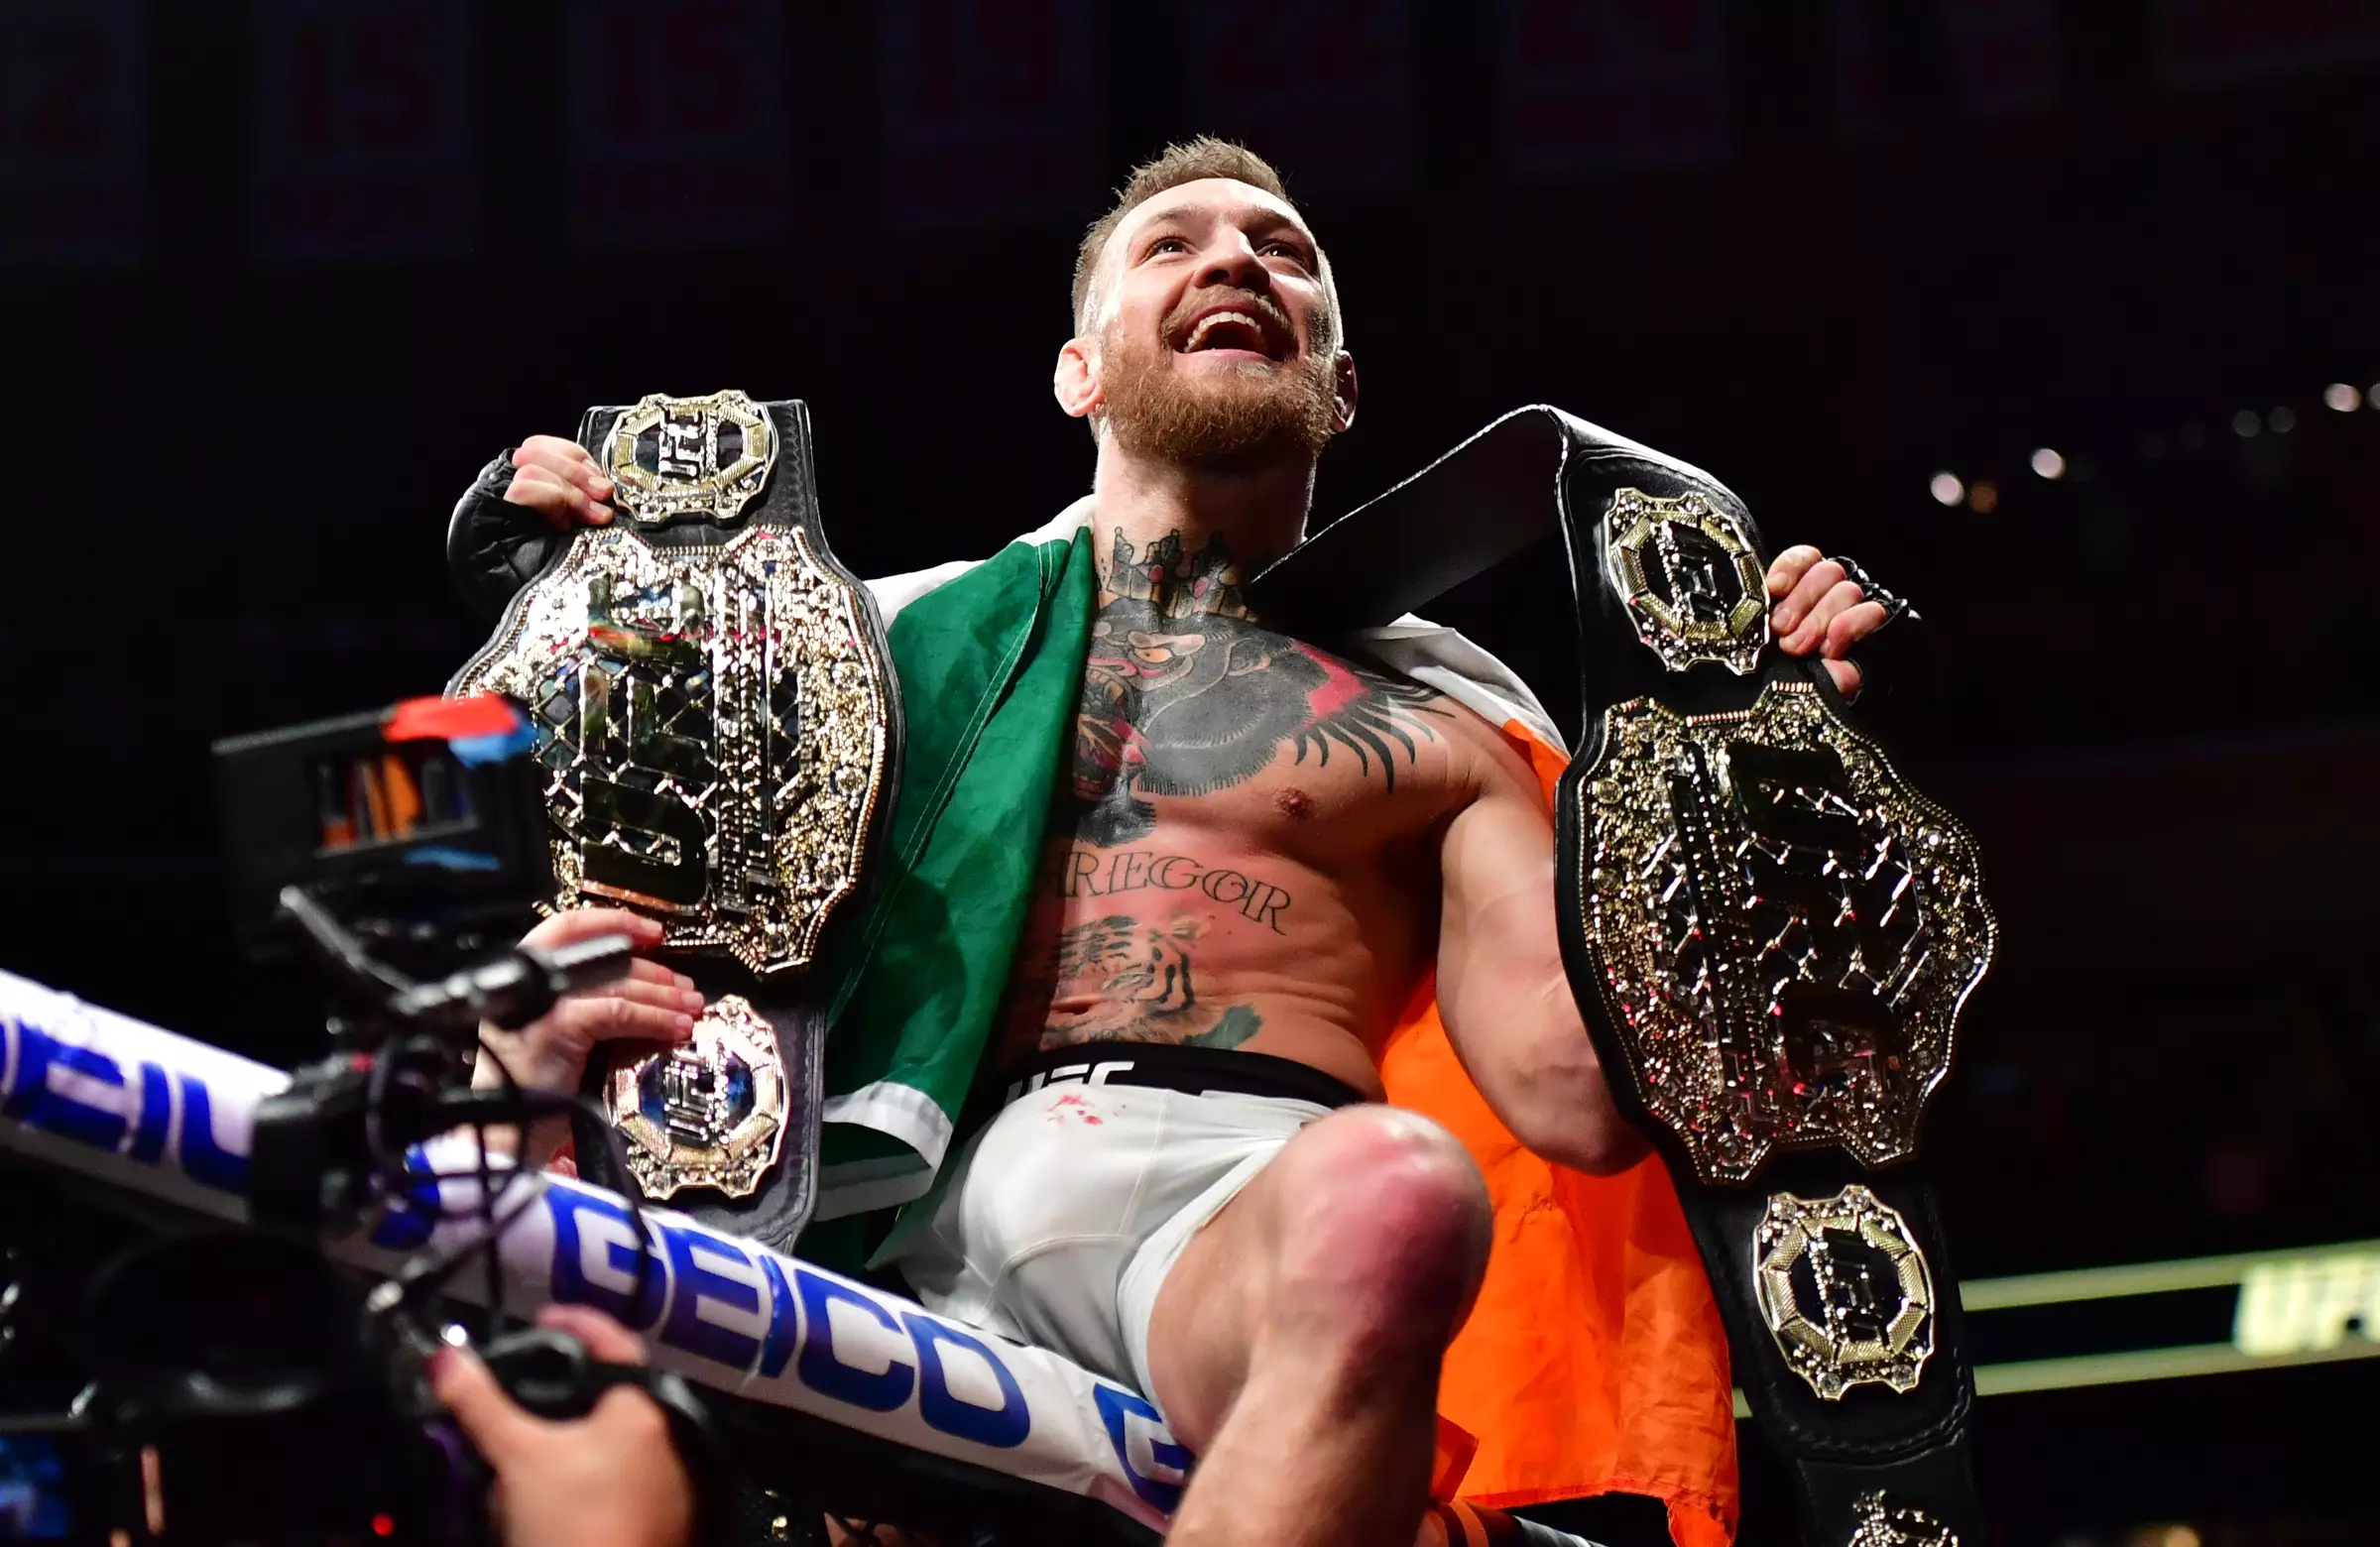 McGregor defeated Eddie Alvarez to become the first UFC fighter to hold two belts simultaneously.